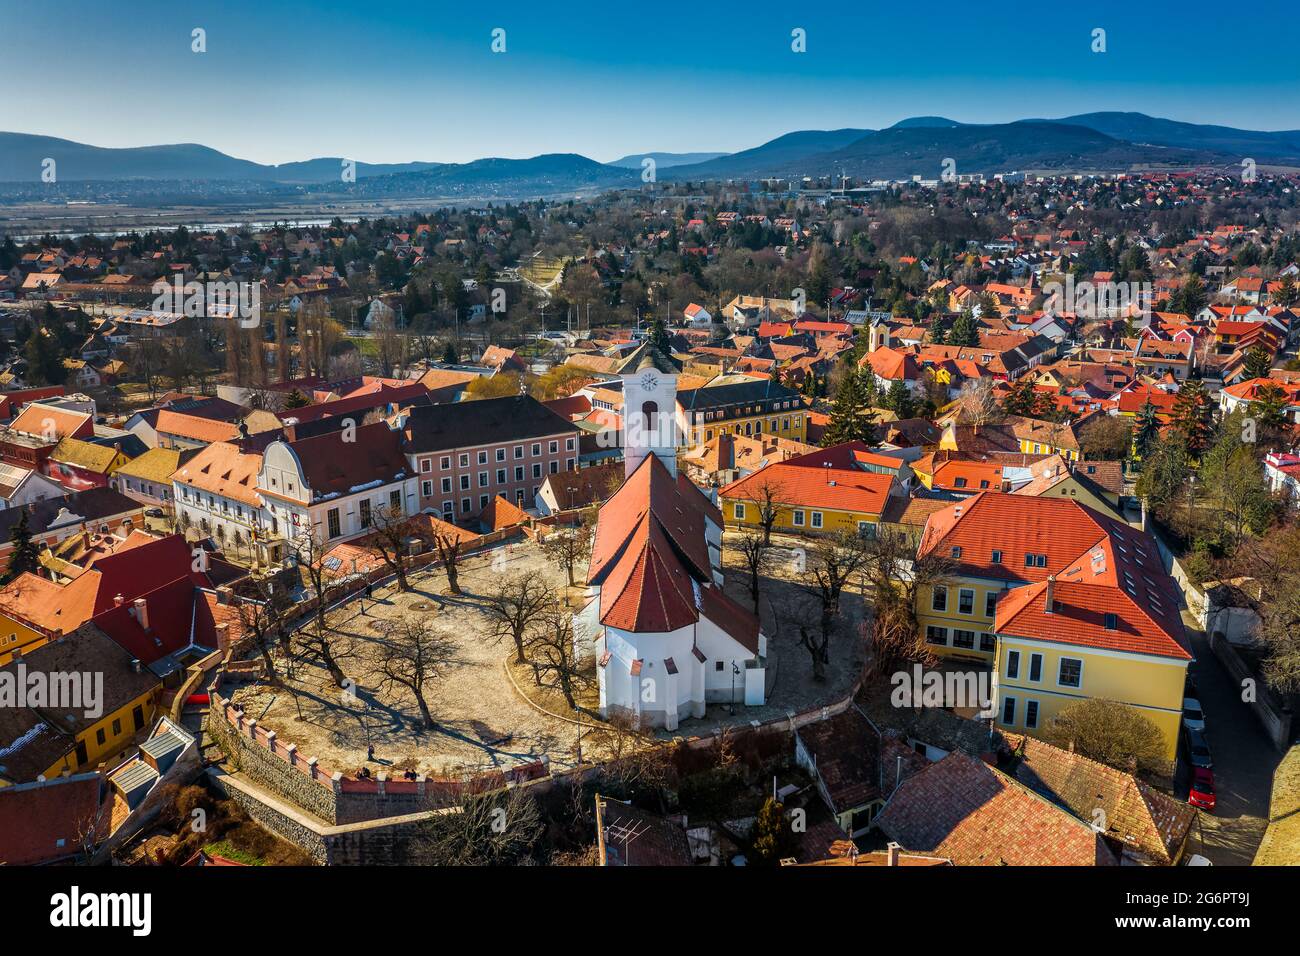 Szentendre, hungary - Aerial view of the city of Szentendre on a sunny day with Belgrade Serbian Orthodox Cathedral and clear blue sky Stock Photo